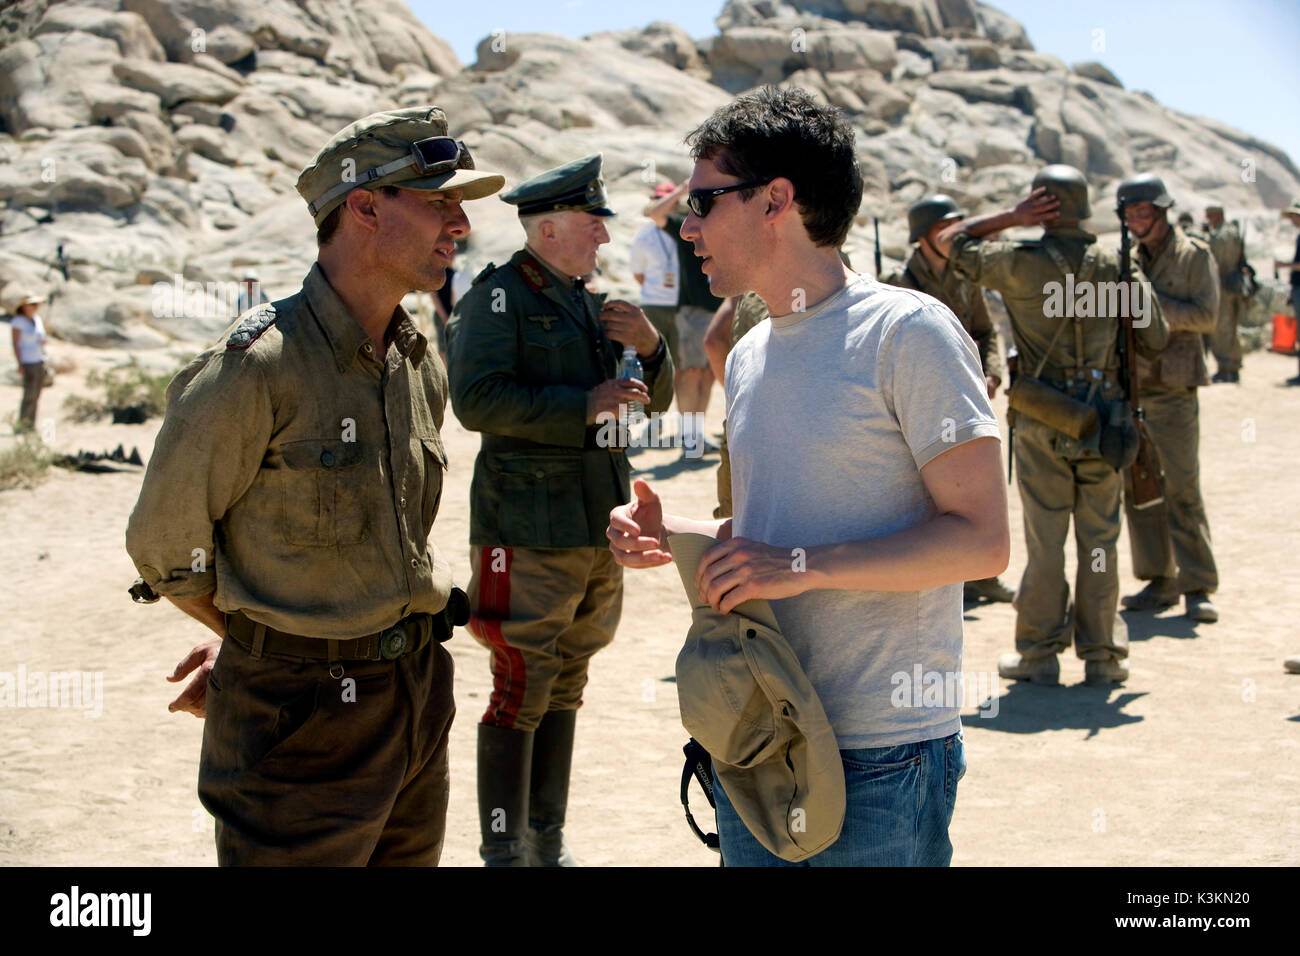 VALKYRIE TOM CRUISE, Director BRYAN SINGER on the set        Date: 2008 Stock Photo